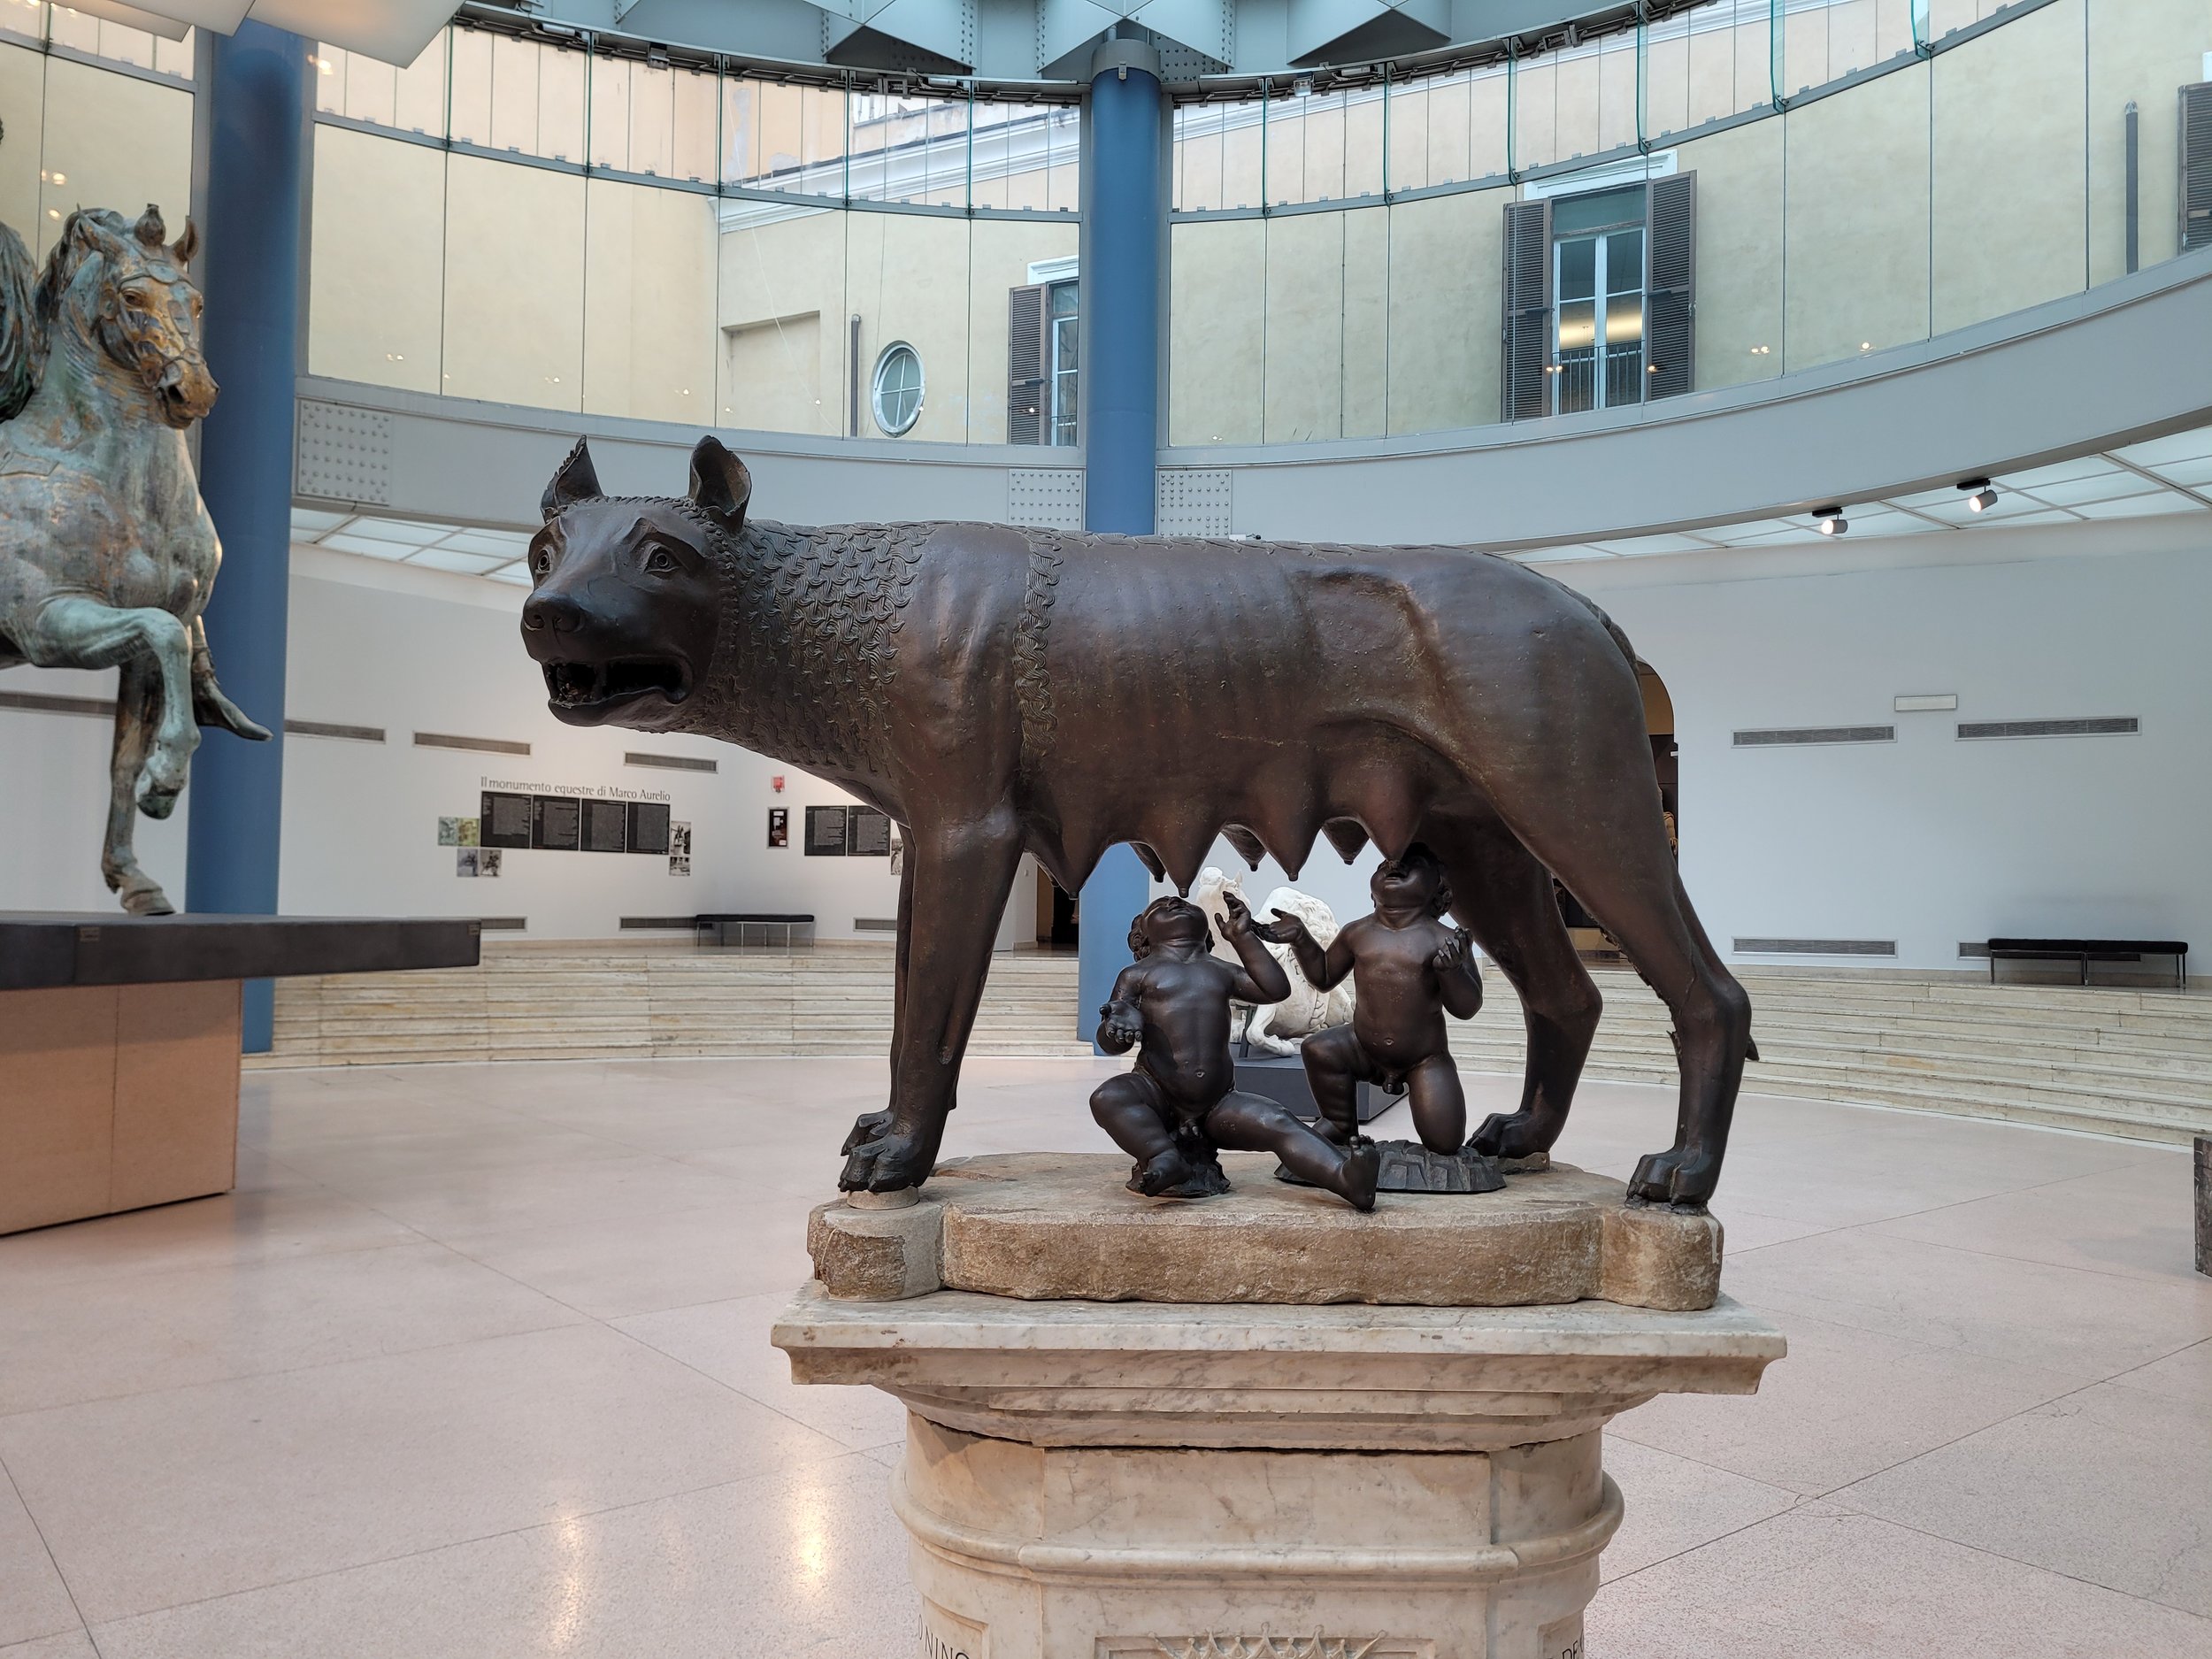 7 Hills of Rome - Romulus, Remus and the She-Wolf